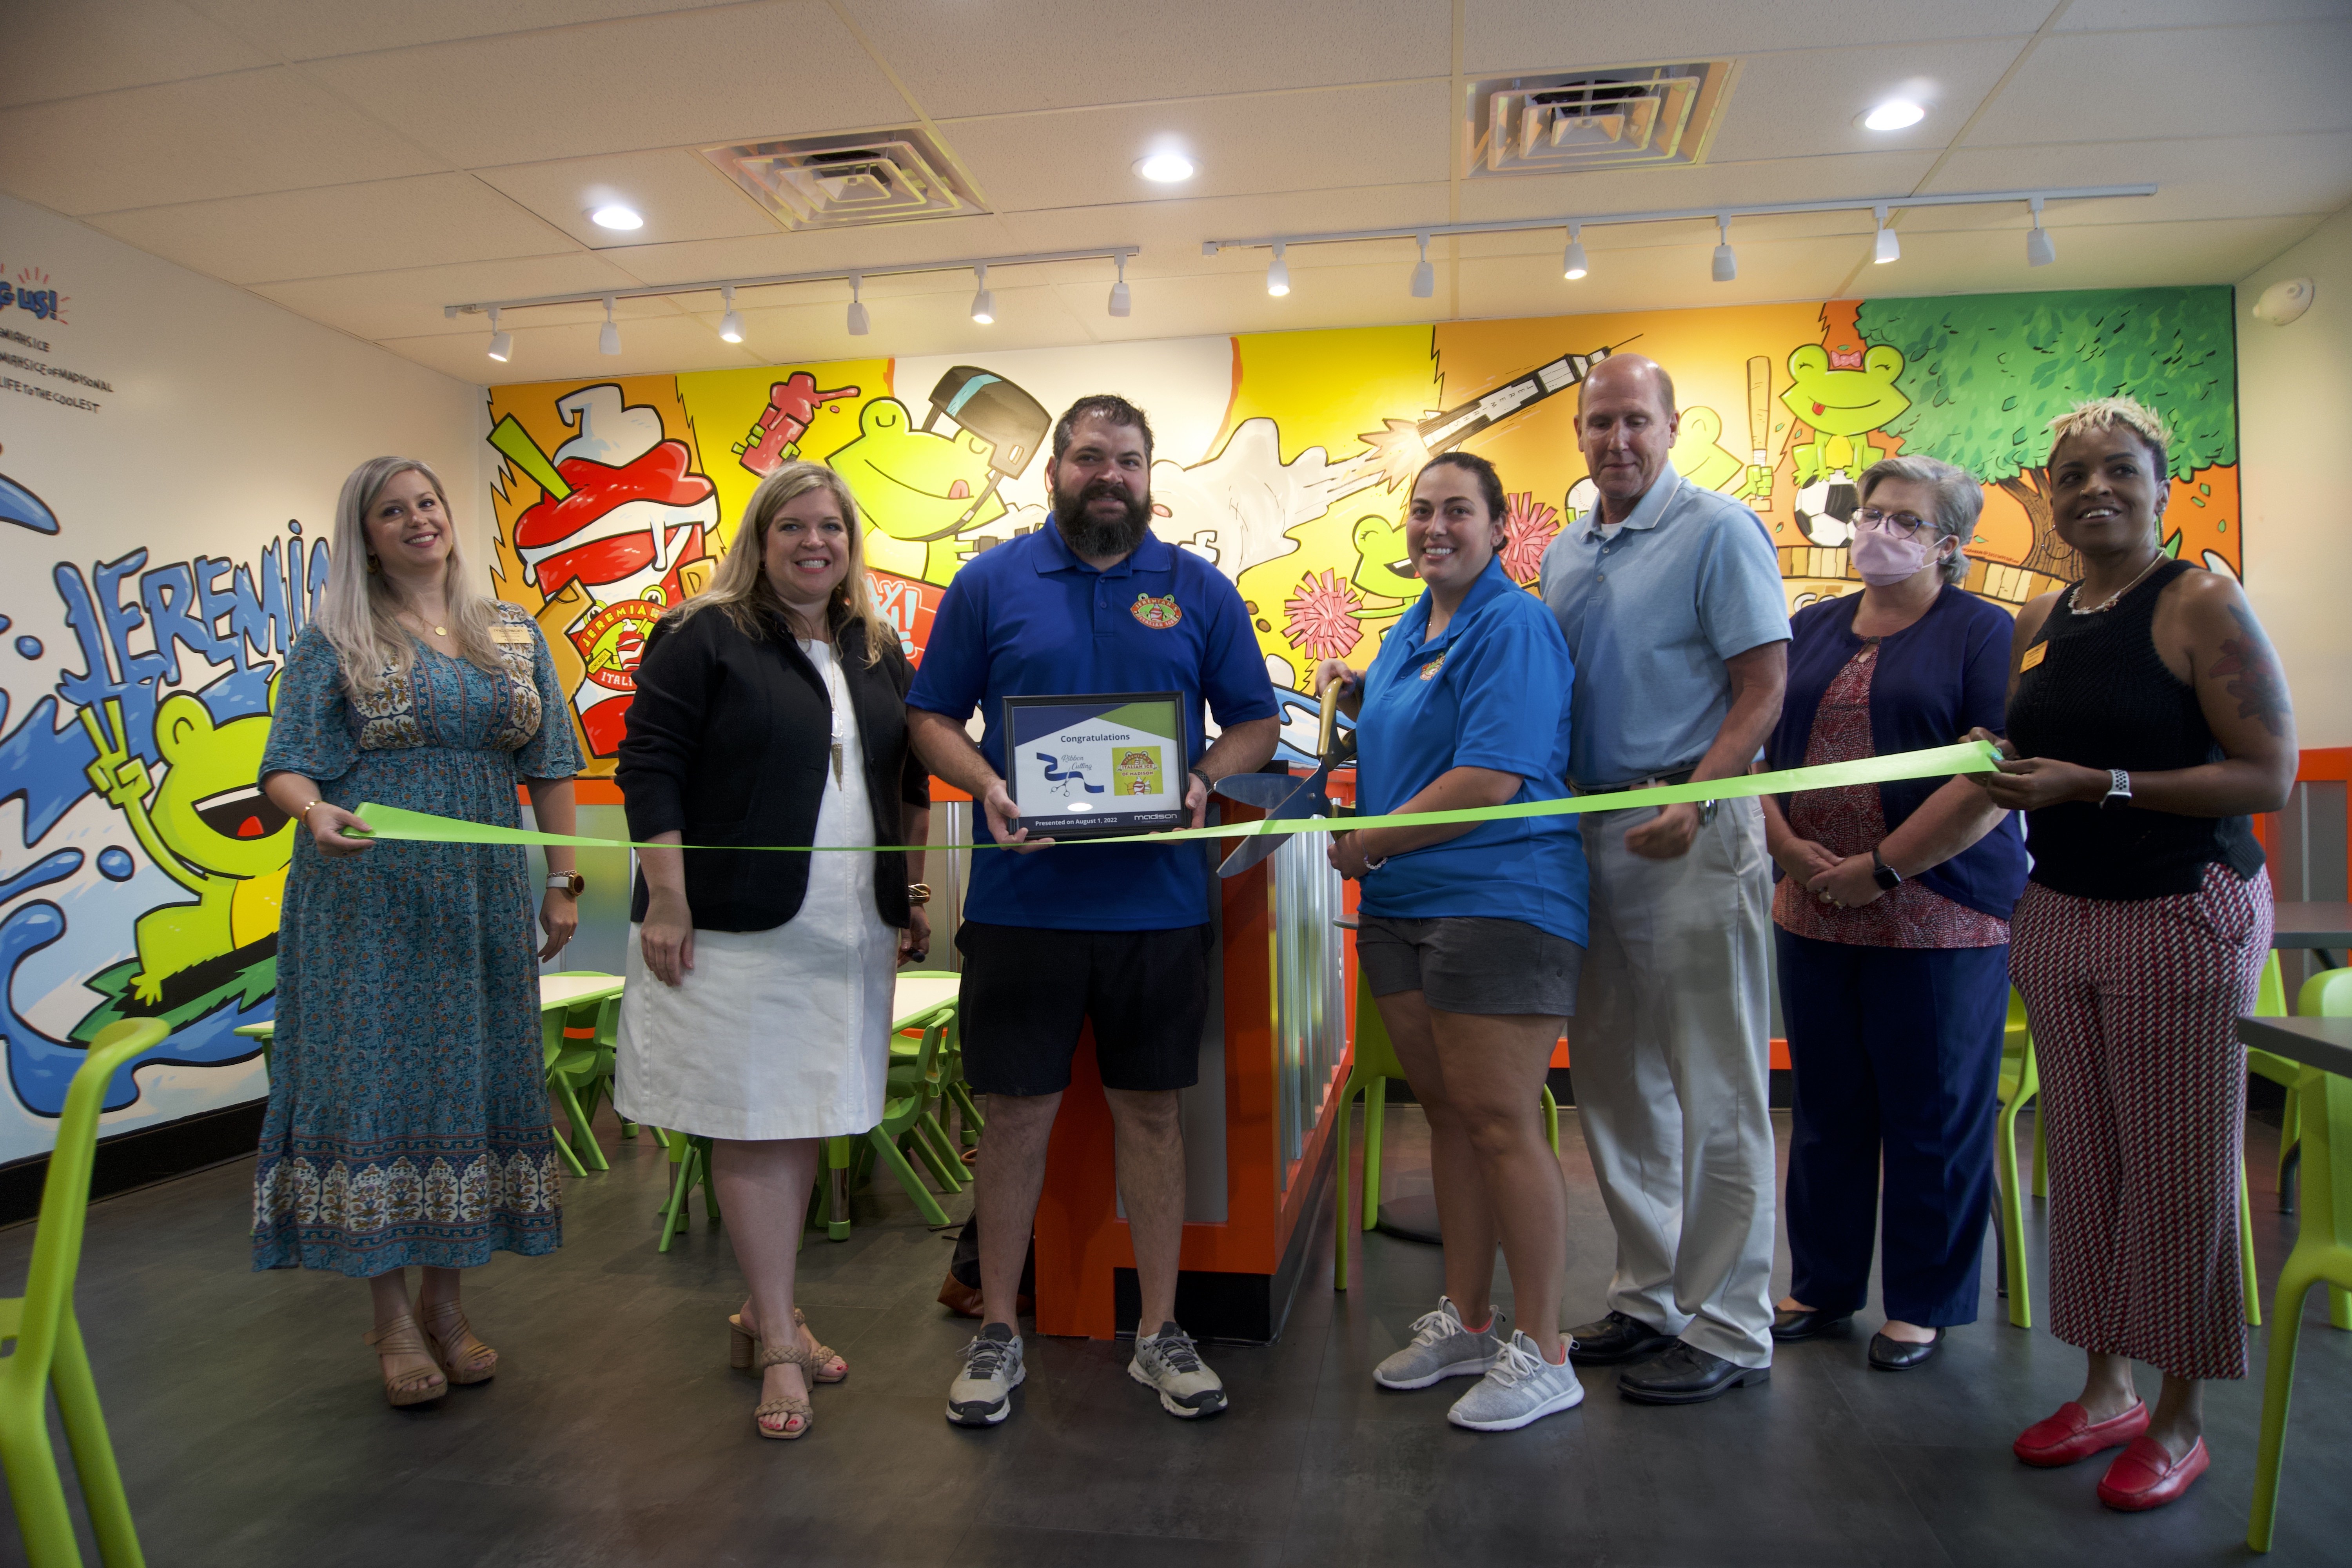 Jeremiah's Ice Ribbon Cutting August 1st 2022